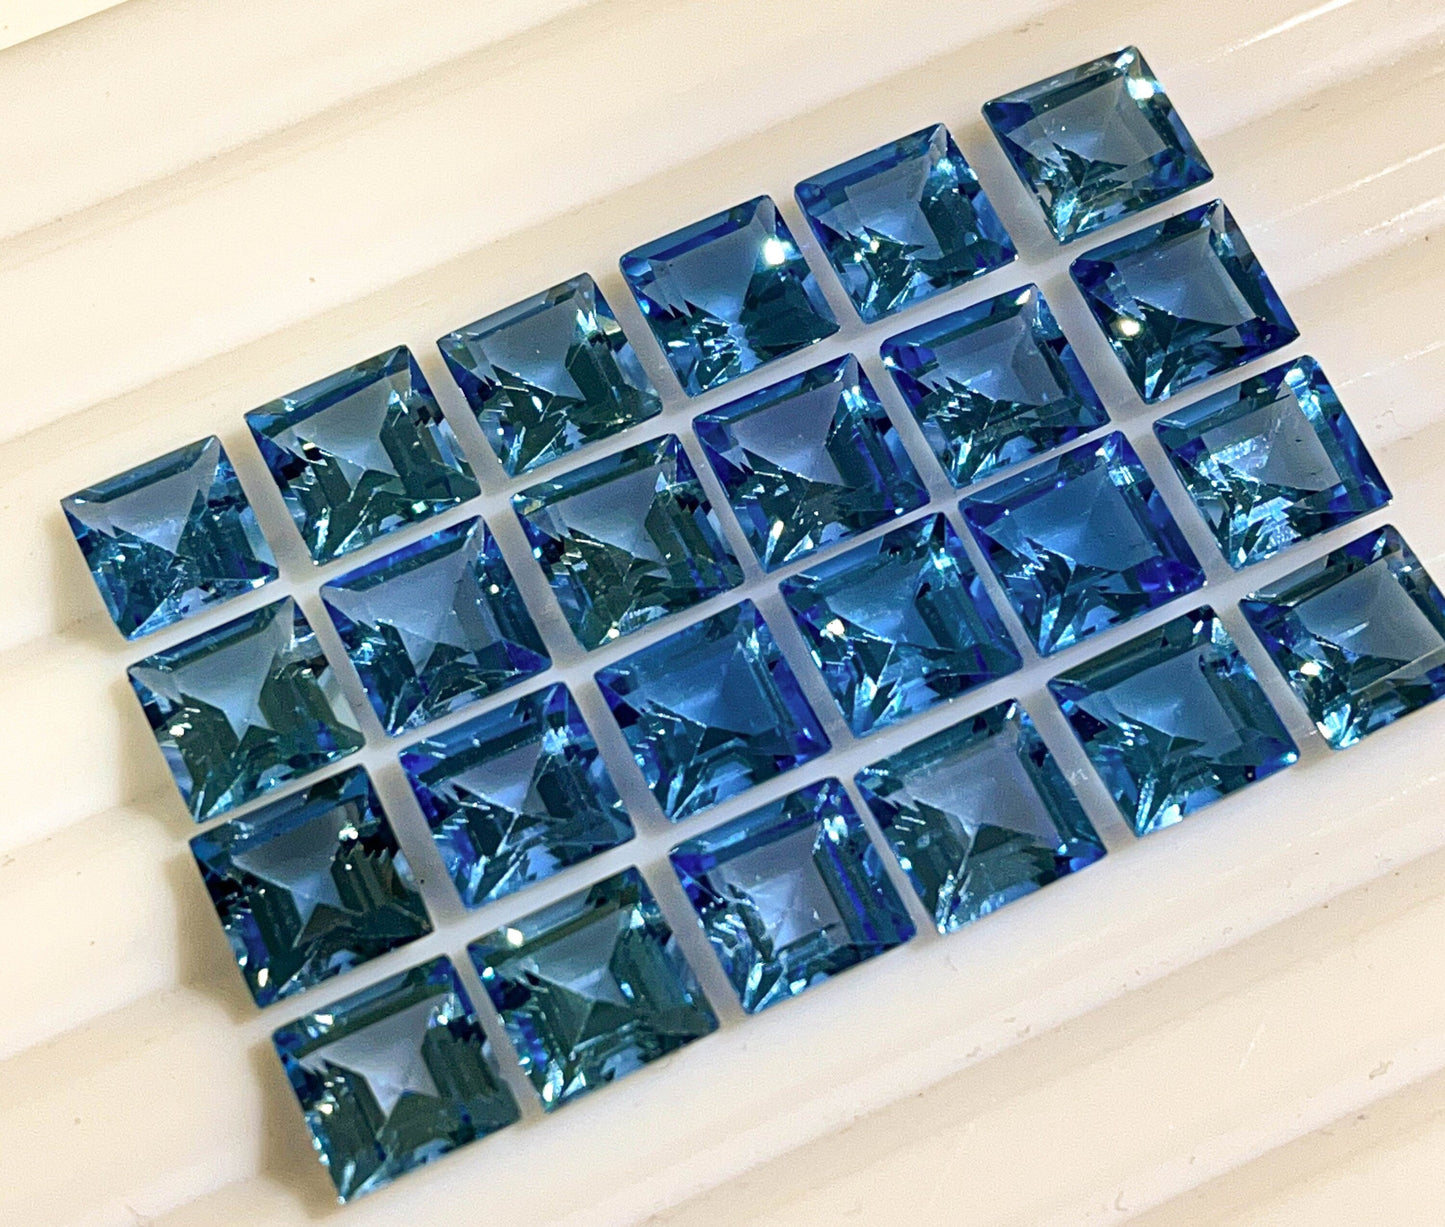 AAA Swiss Blue Topaz Faceted Square Cut Gemstone, Loose Gemstone price per piece Beadsforyourjewelry